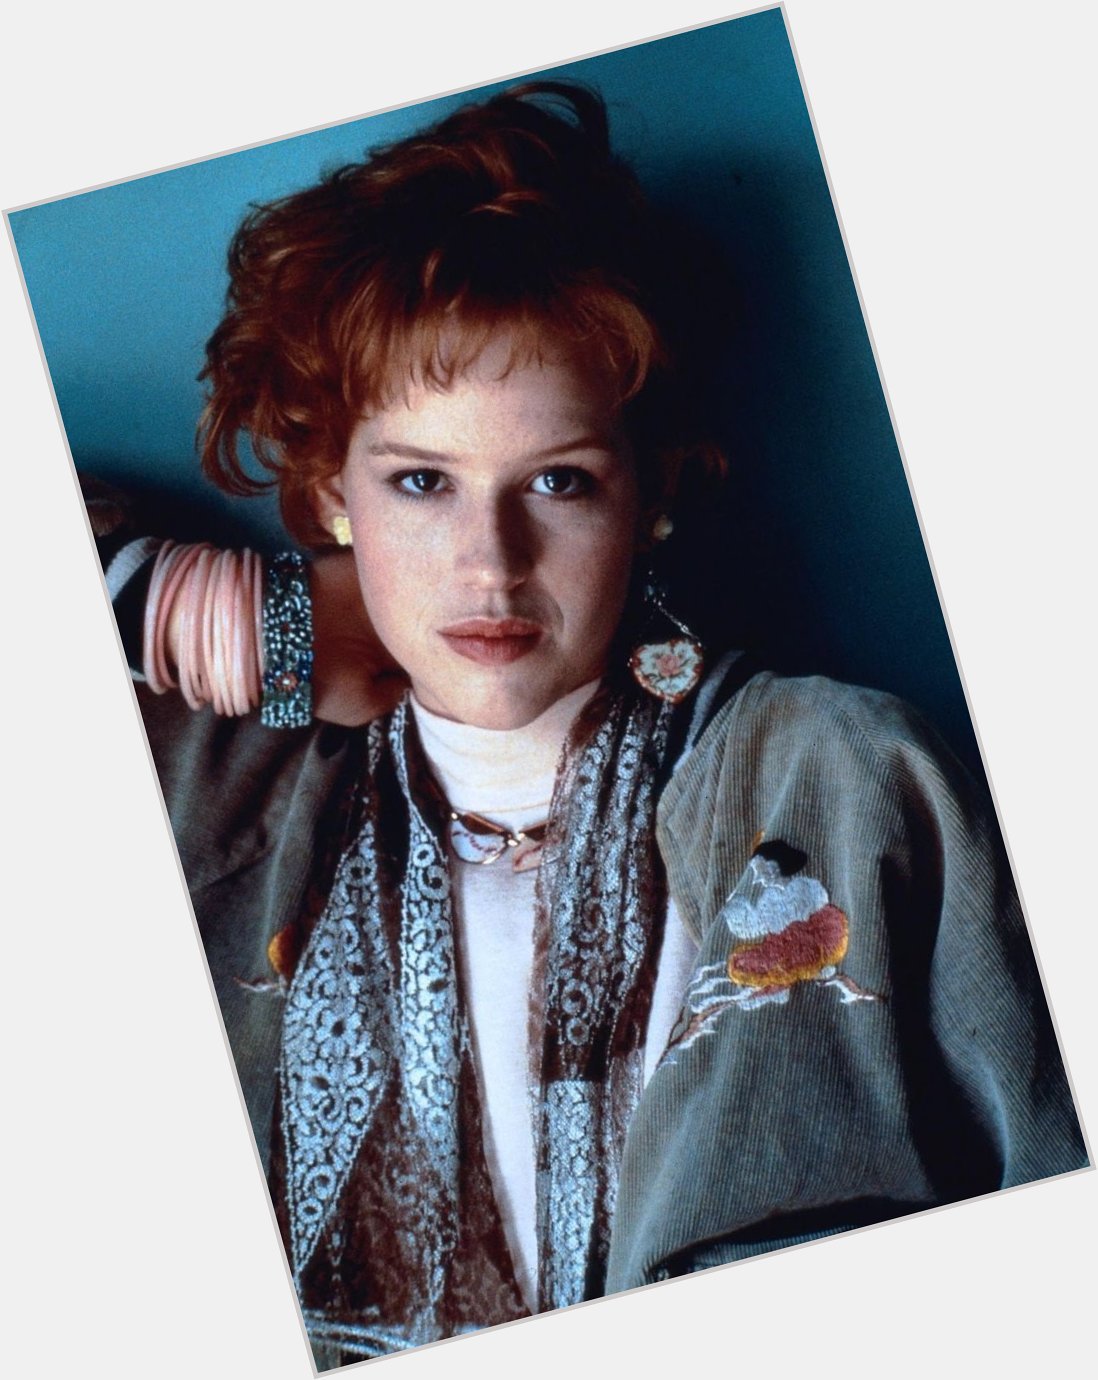 Happy birthday to American actress, singer, and author Molly Ringwald, born February 18, 1968. 